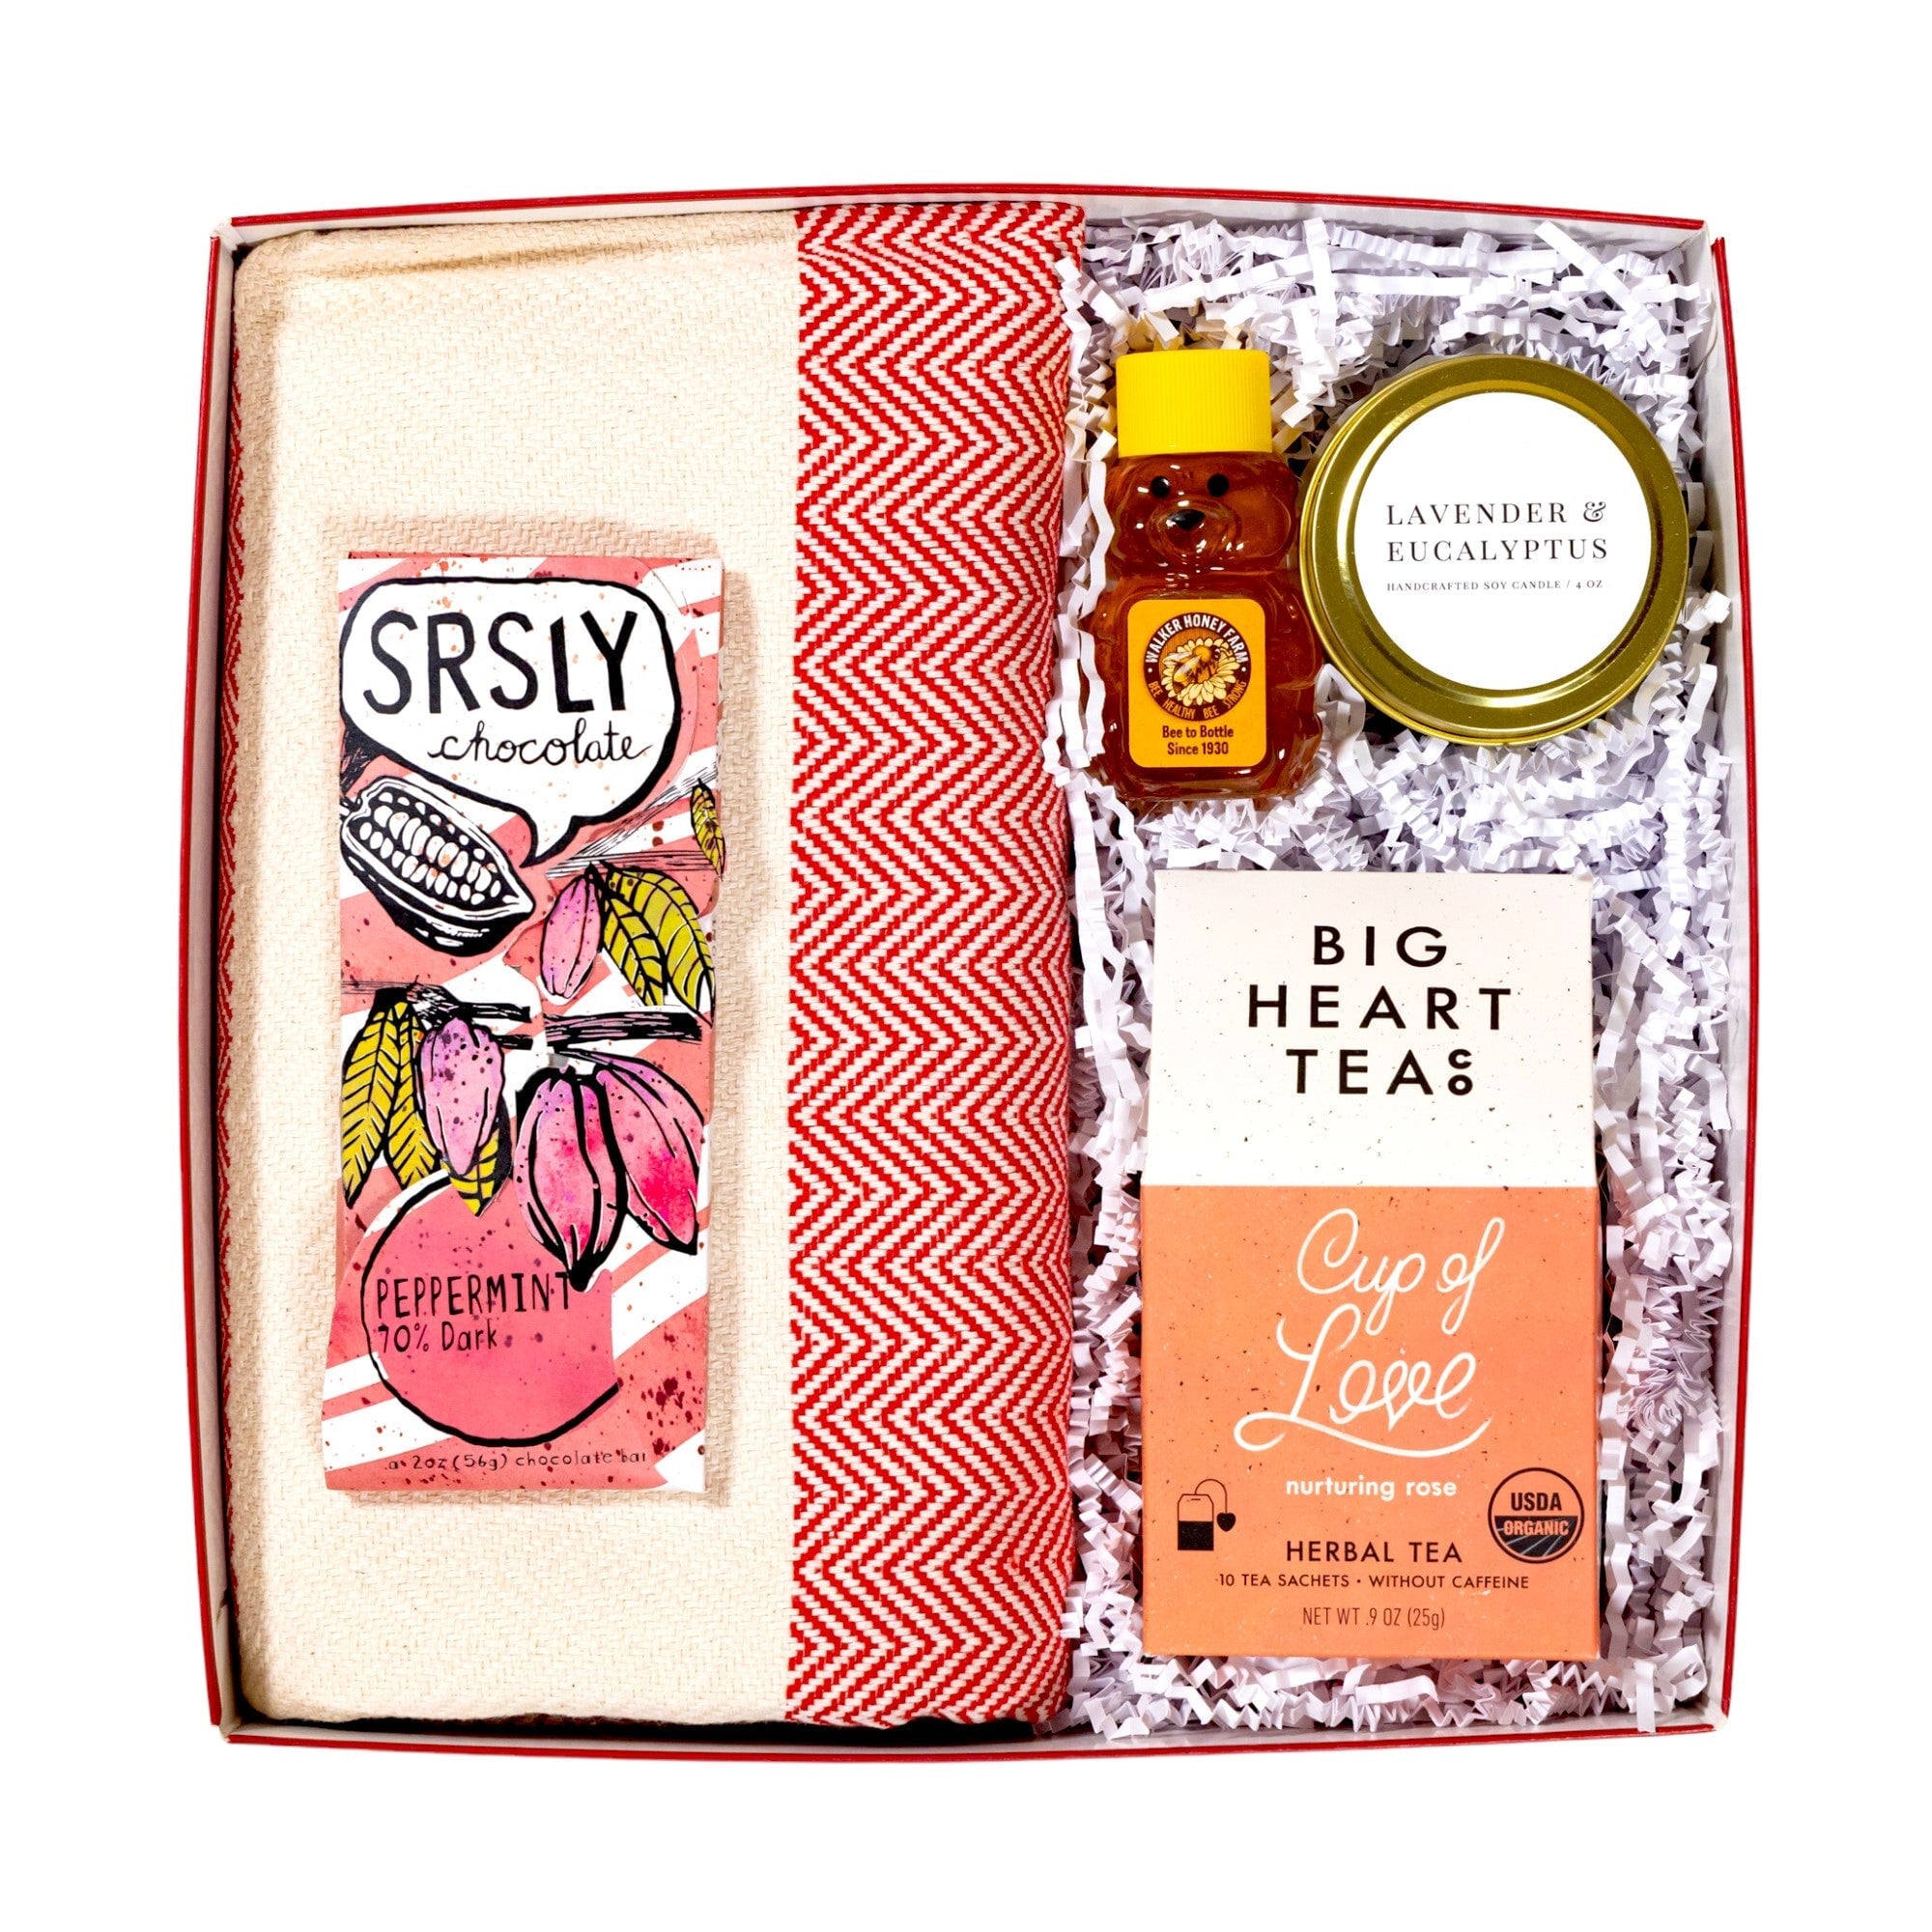 With Love! Blanket, Turkish towel, holiday soy candle, herbal tea The Artisan Gift Boxes 